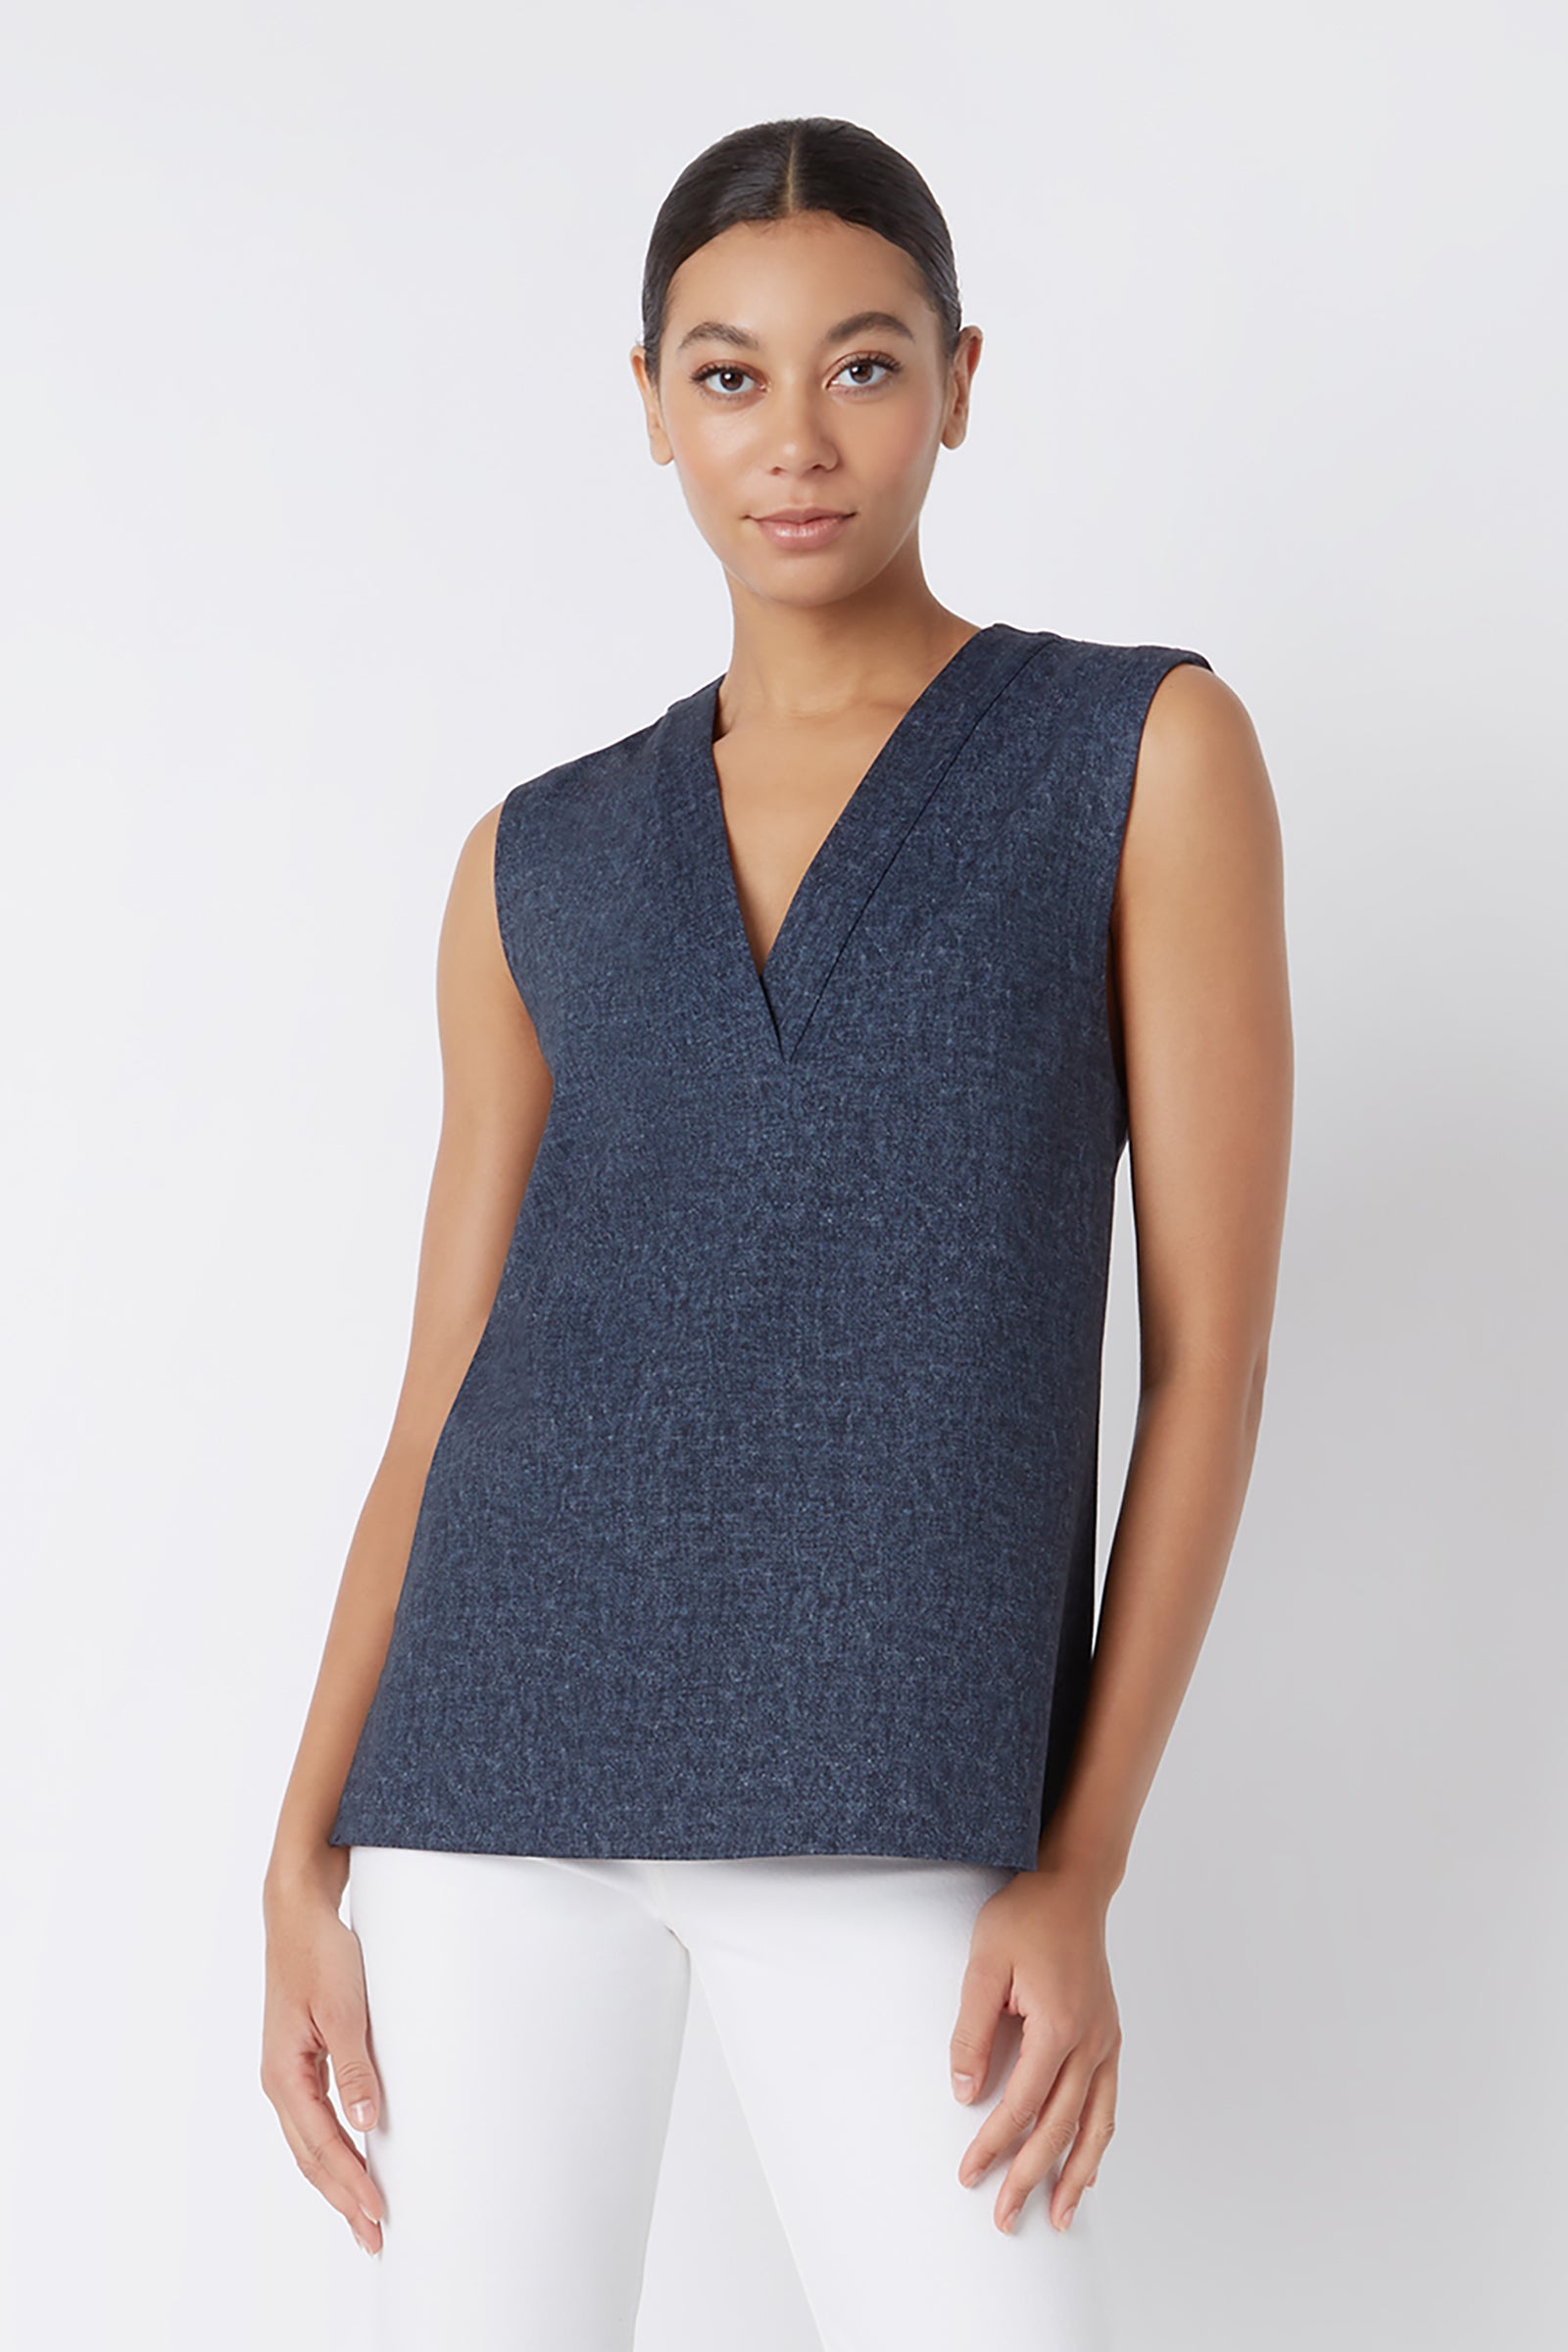 Kal Rieman Dustin Collared Vest in Navy Heather on Model Cropped Front View